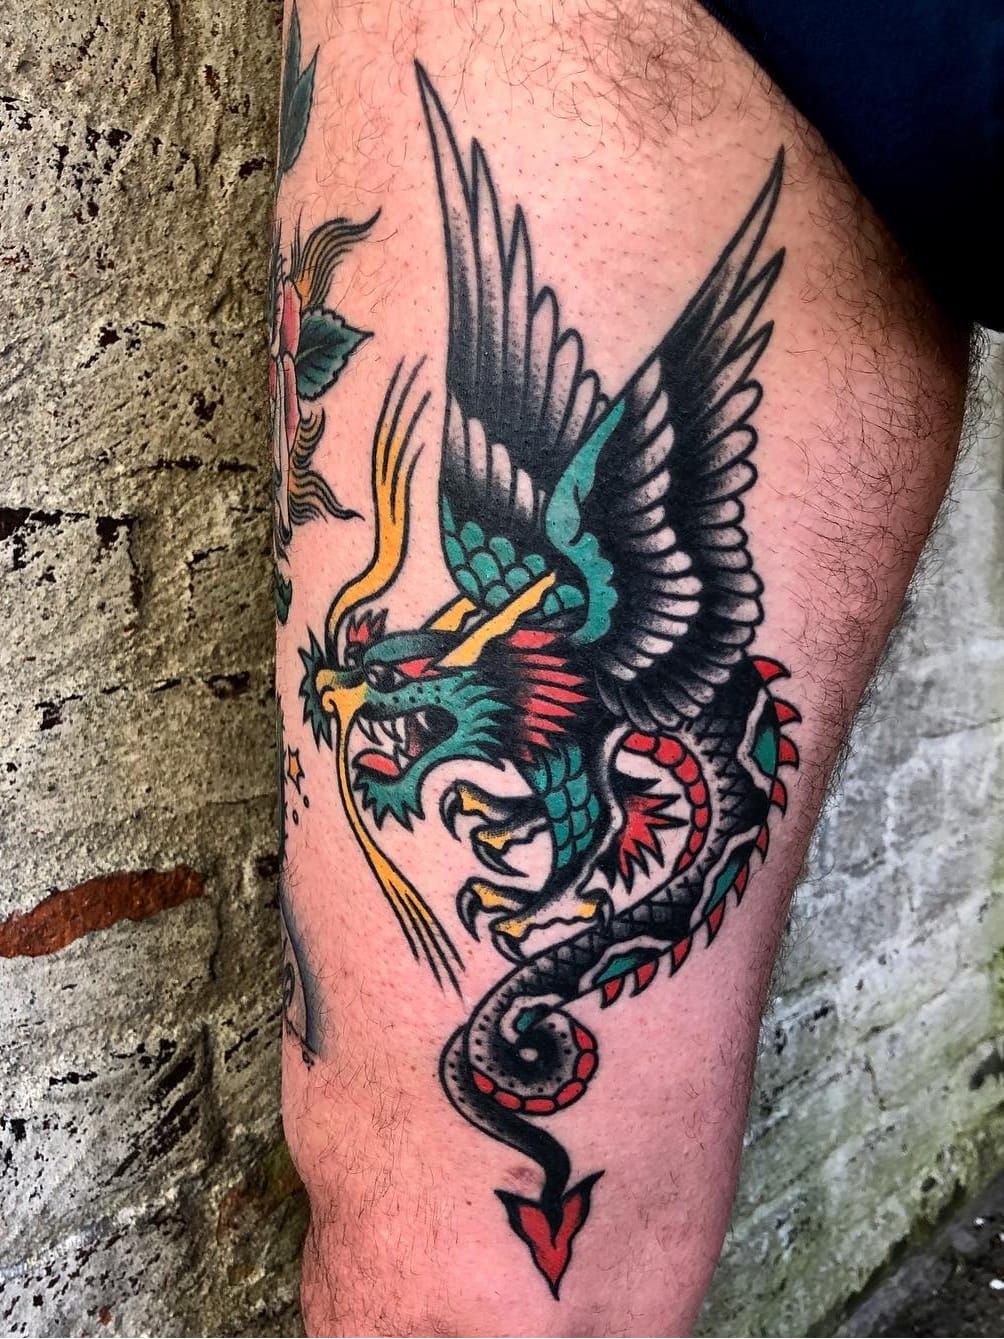 Tattoo of a dragon located on the forearm done in